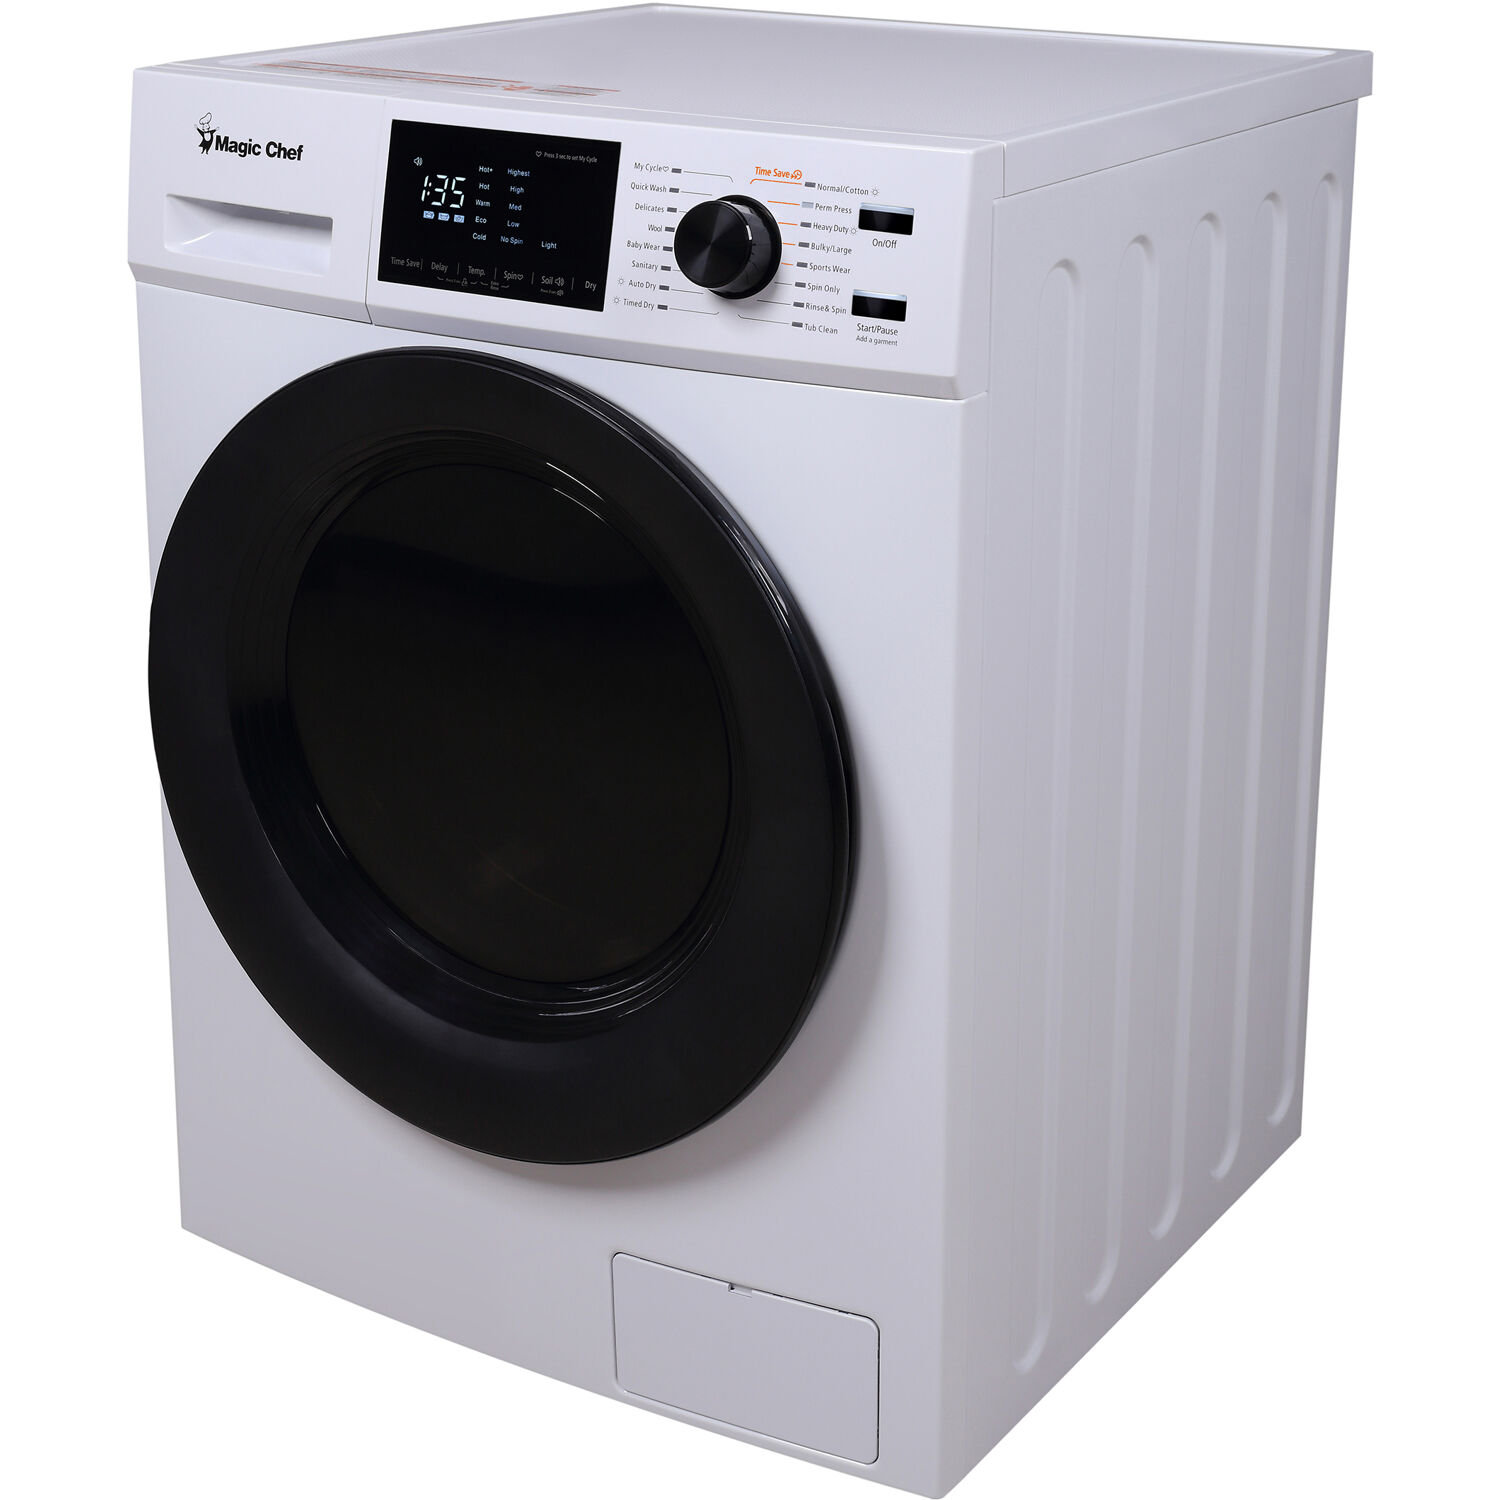 Portable Washers: Everything you need to know (Magic Chef 1.6)- Part 3 